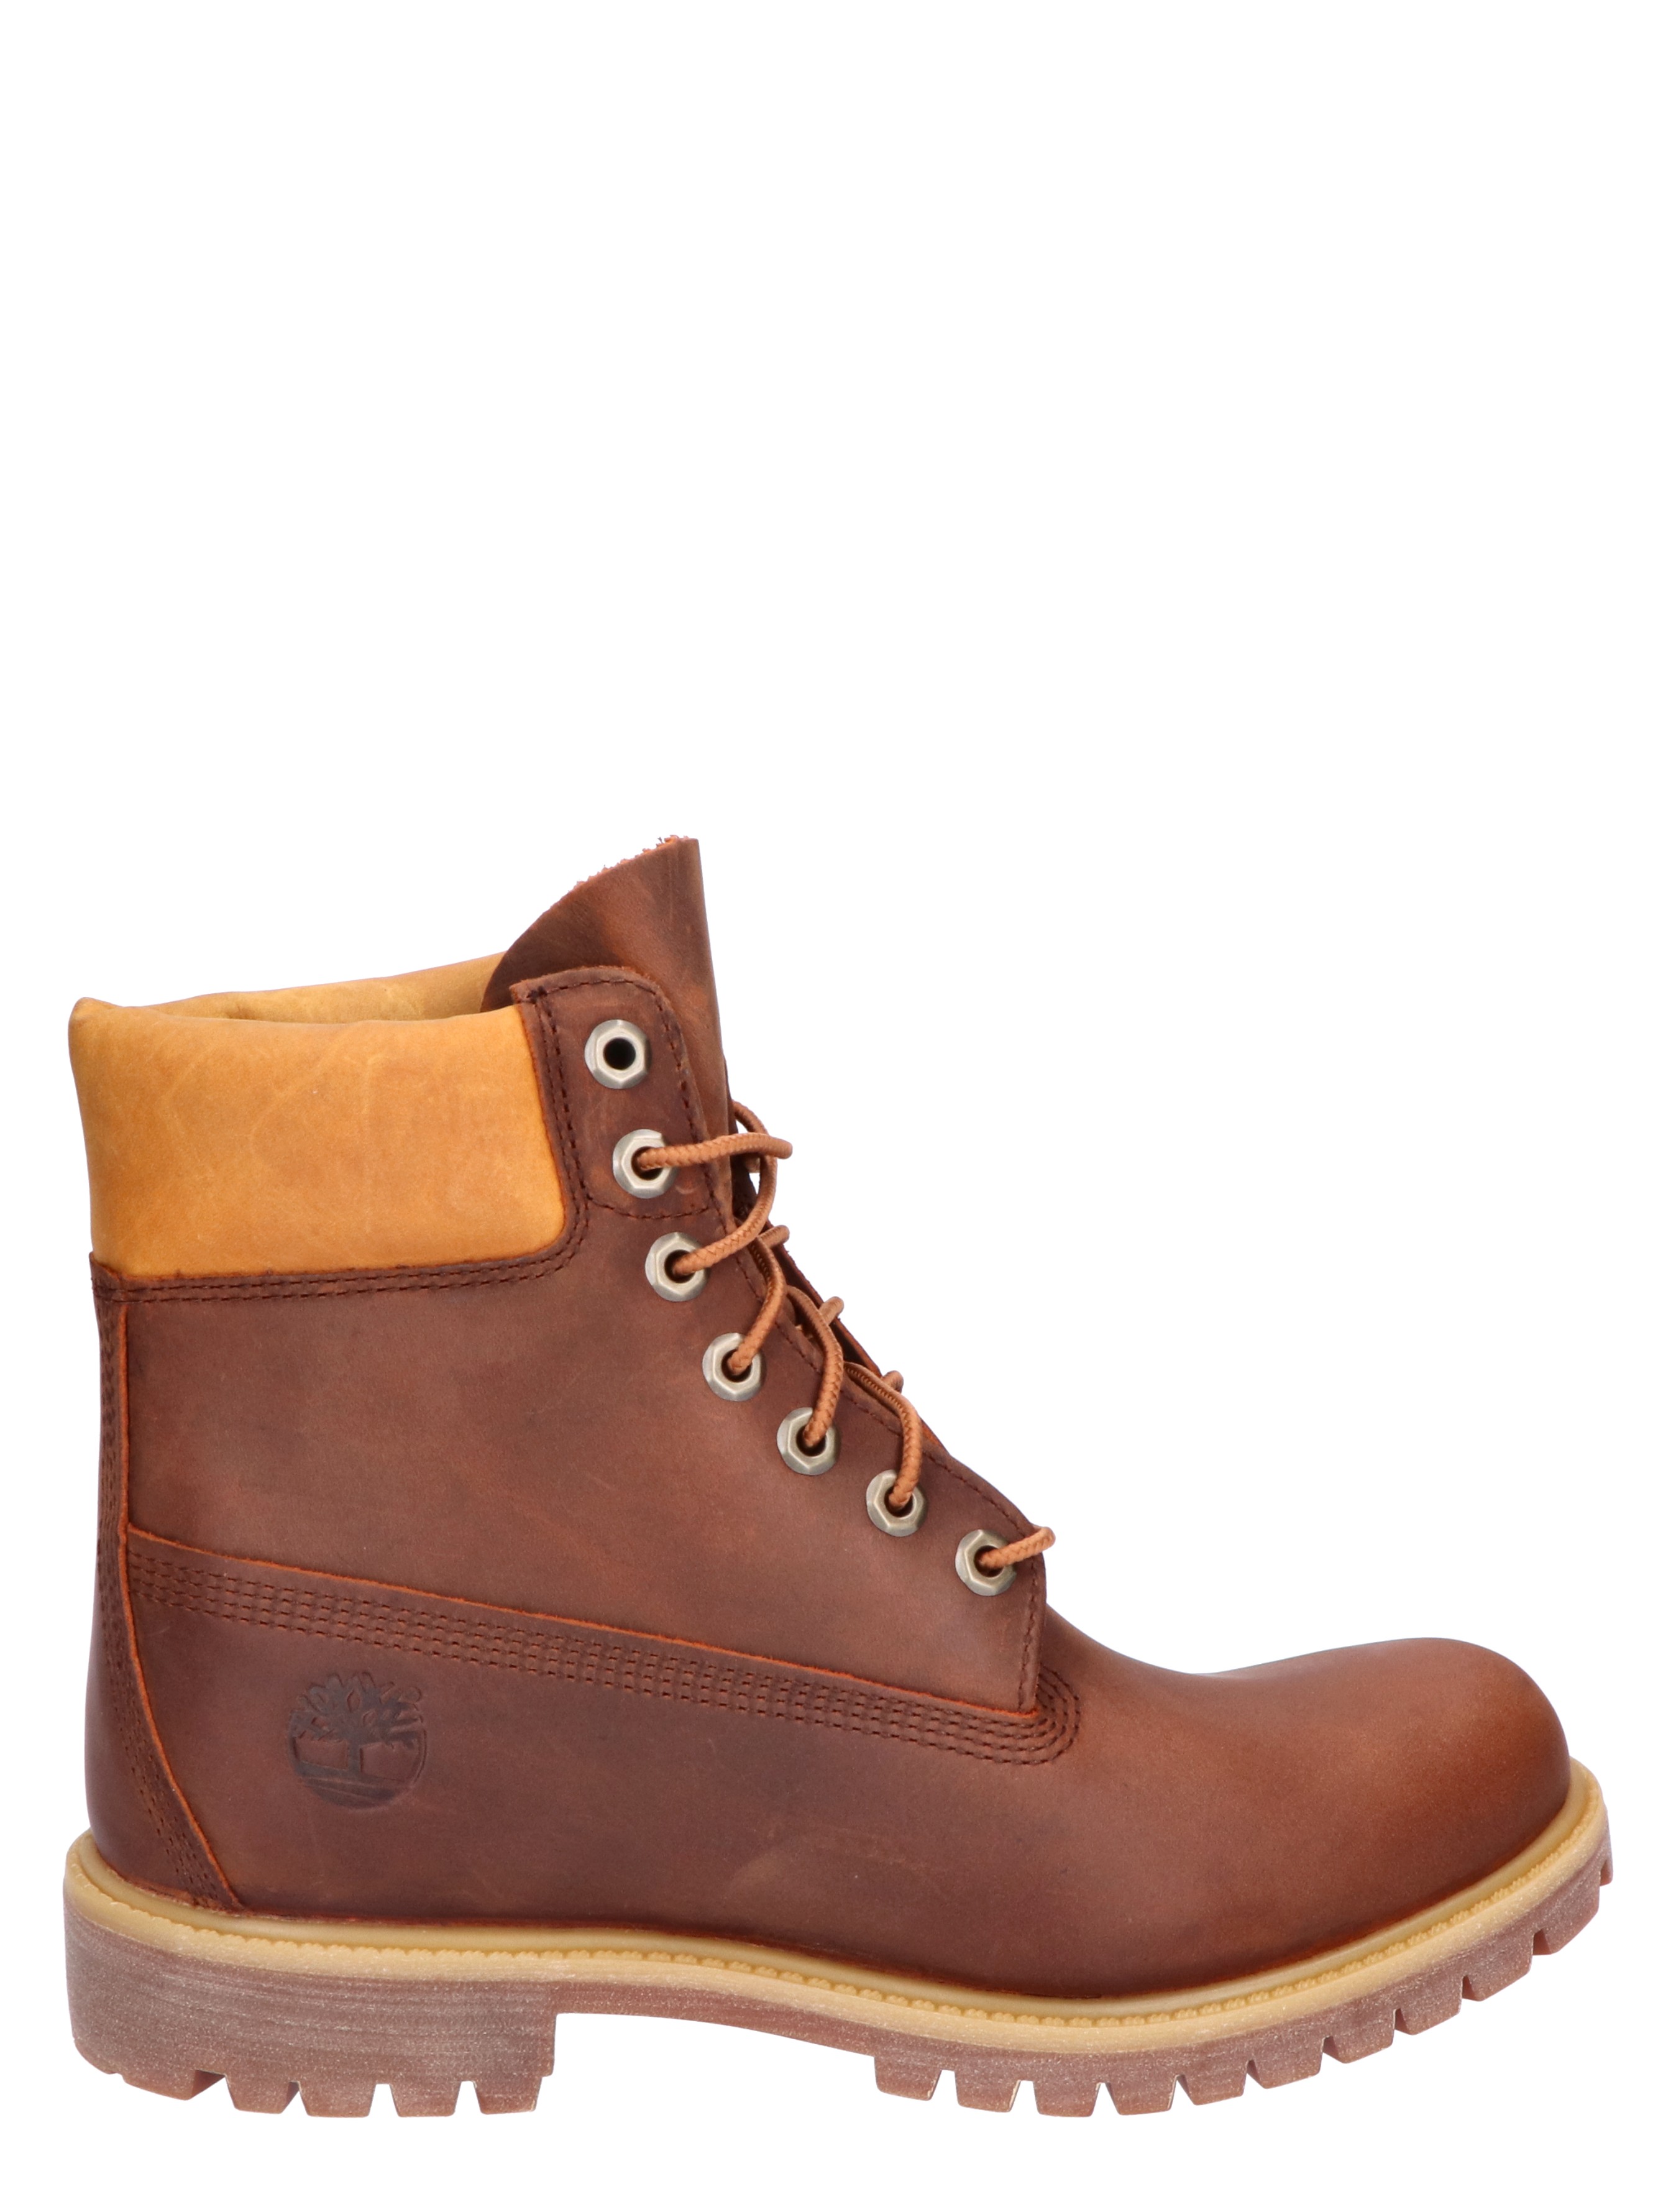 Timberland Premium 6 Inch Boot Waterproof Cathay Spice Veter boots